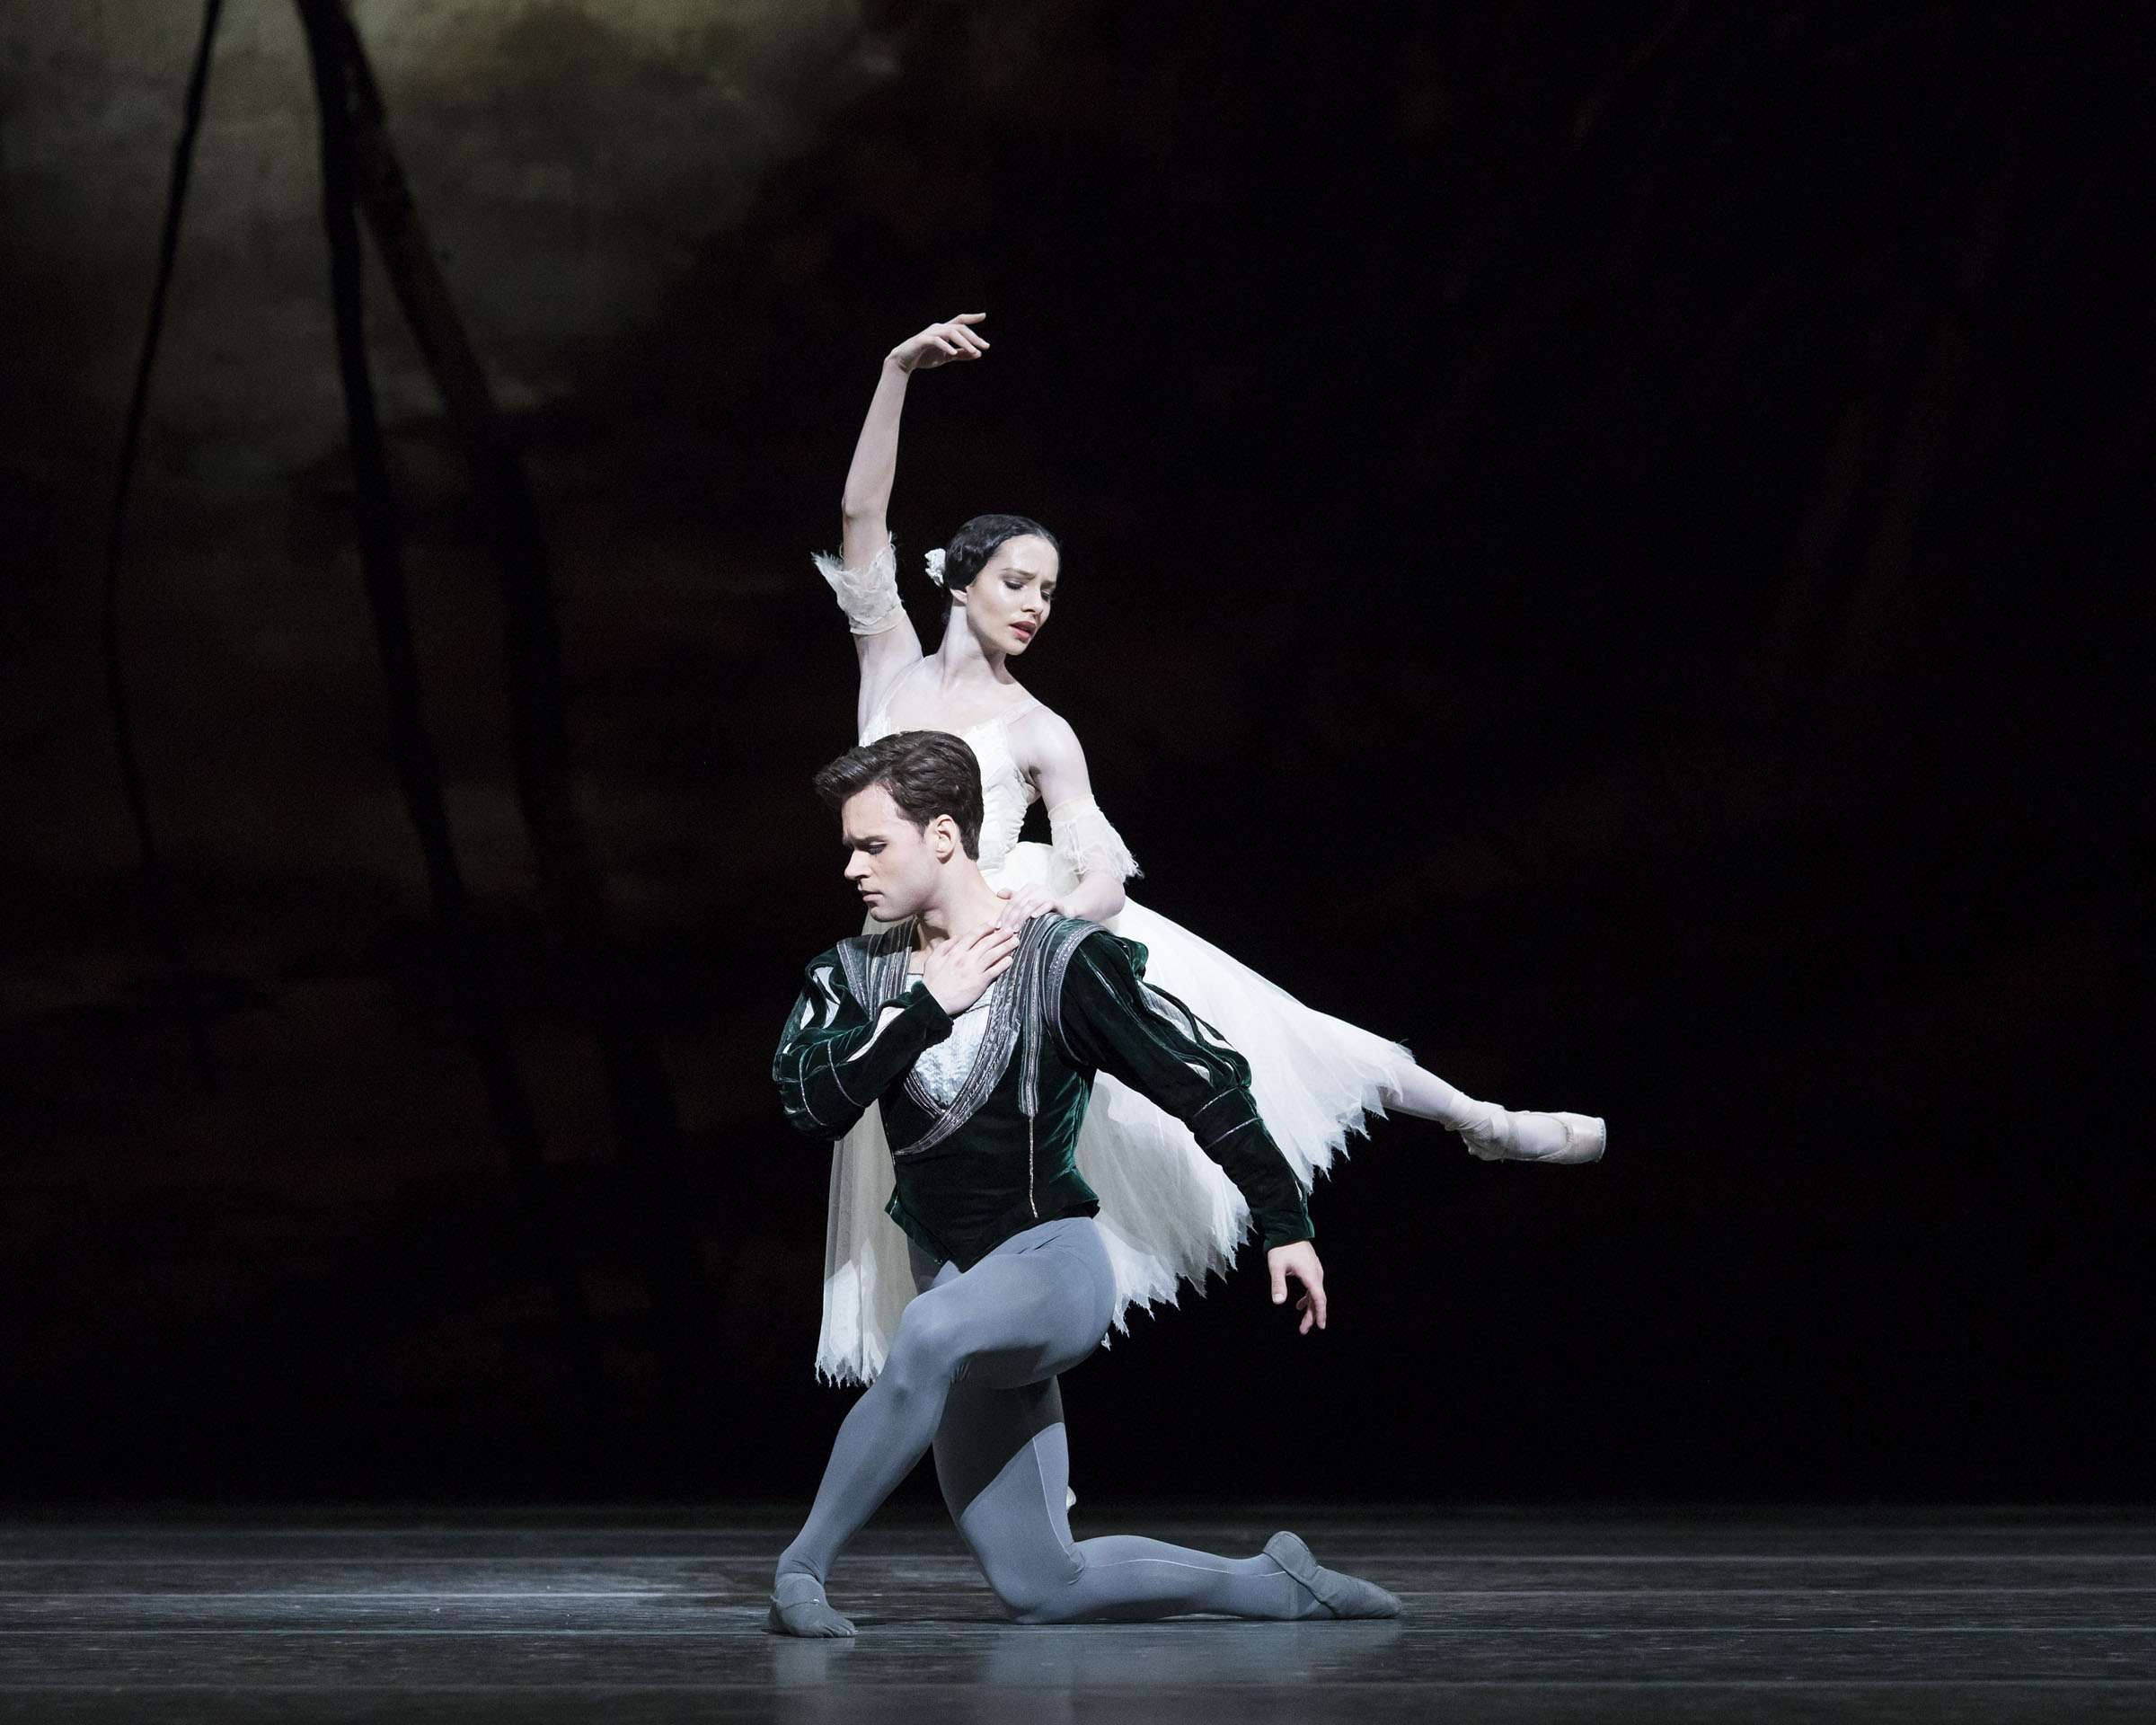 Alexander Campbell as Albrecht and Francesca Hayward as Giselle in Giselle, The Royal Ballet